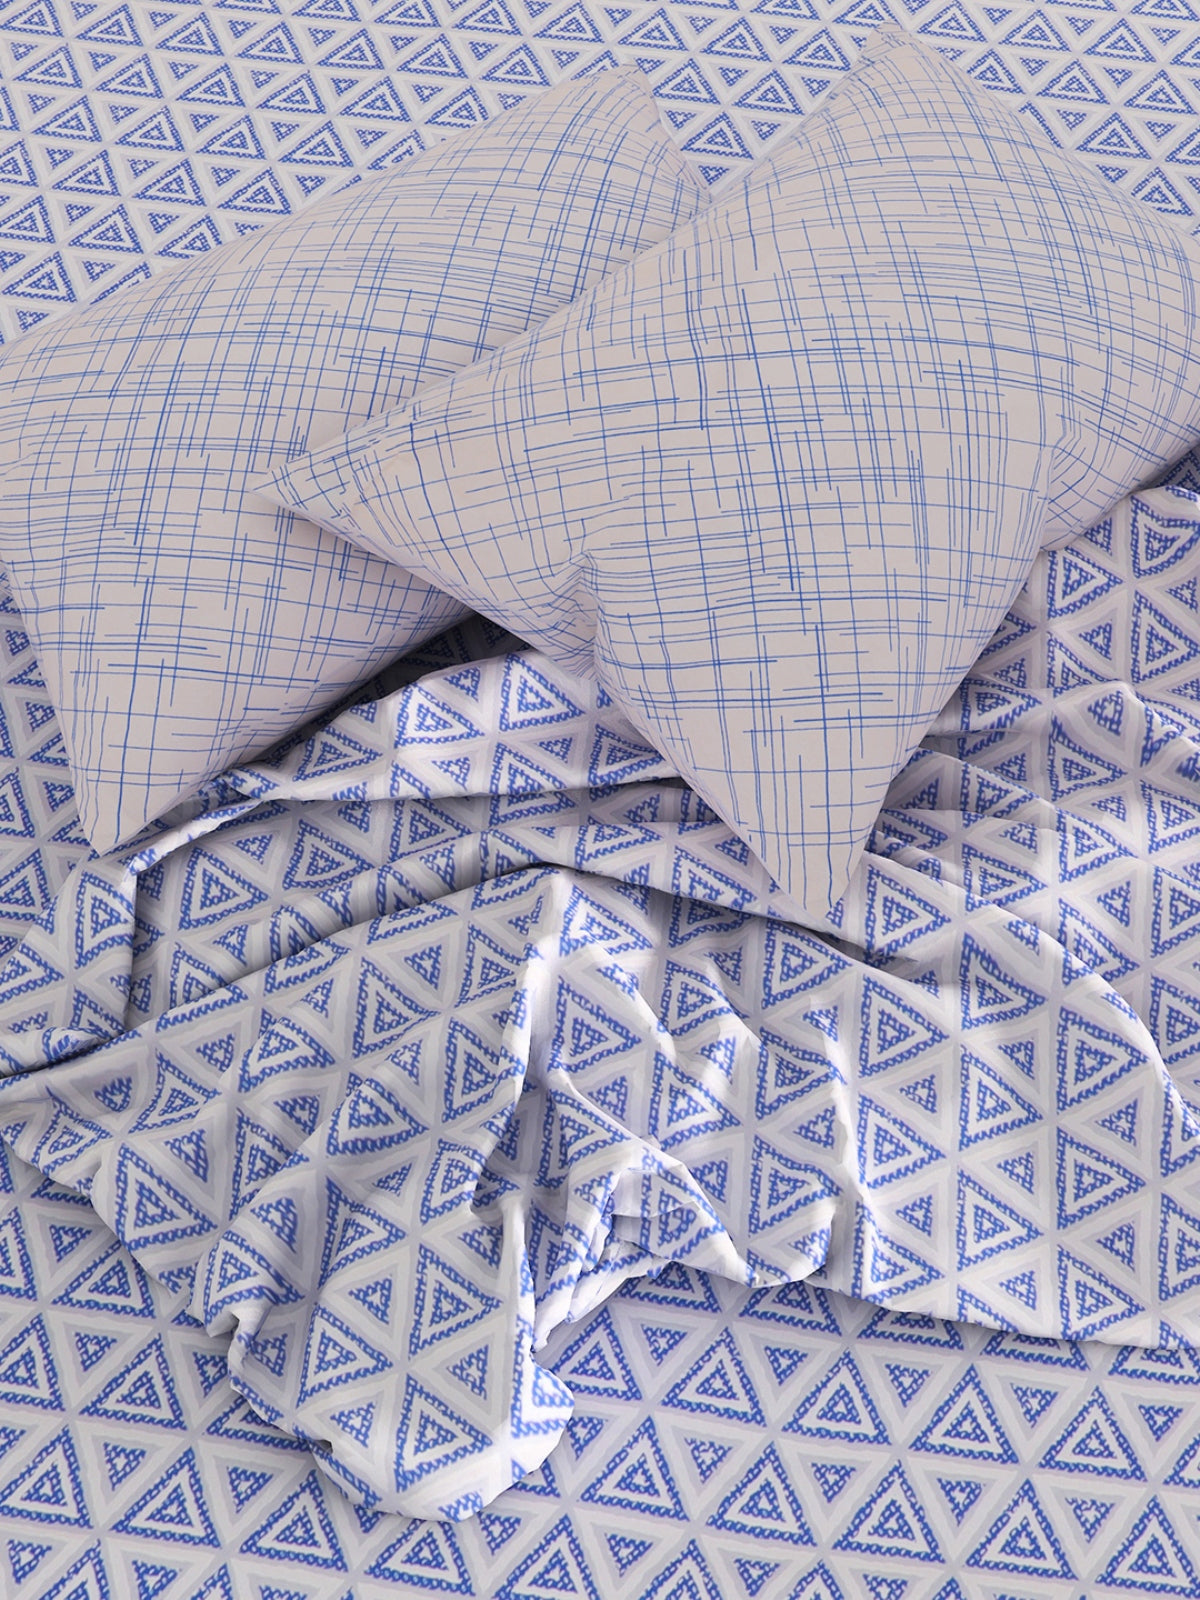 144 TC Blue & White Double Bedsheet with 2 Pillow Covers